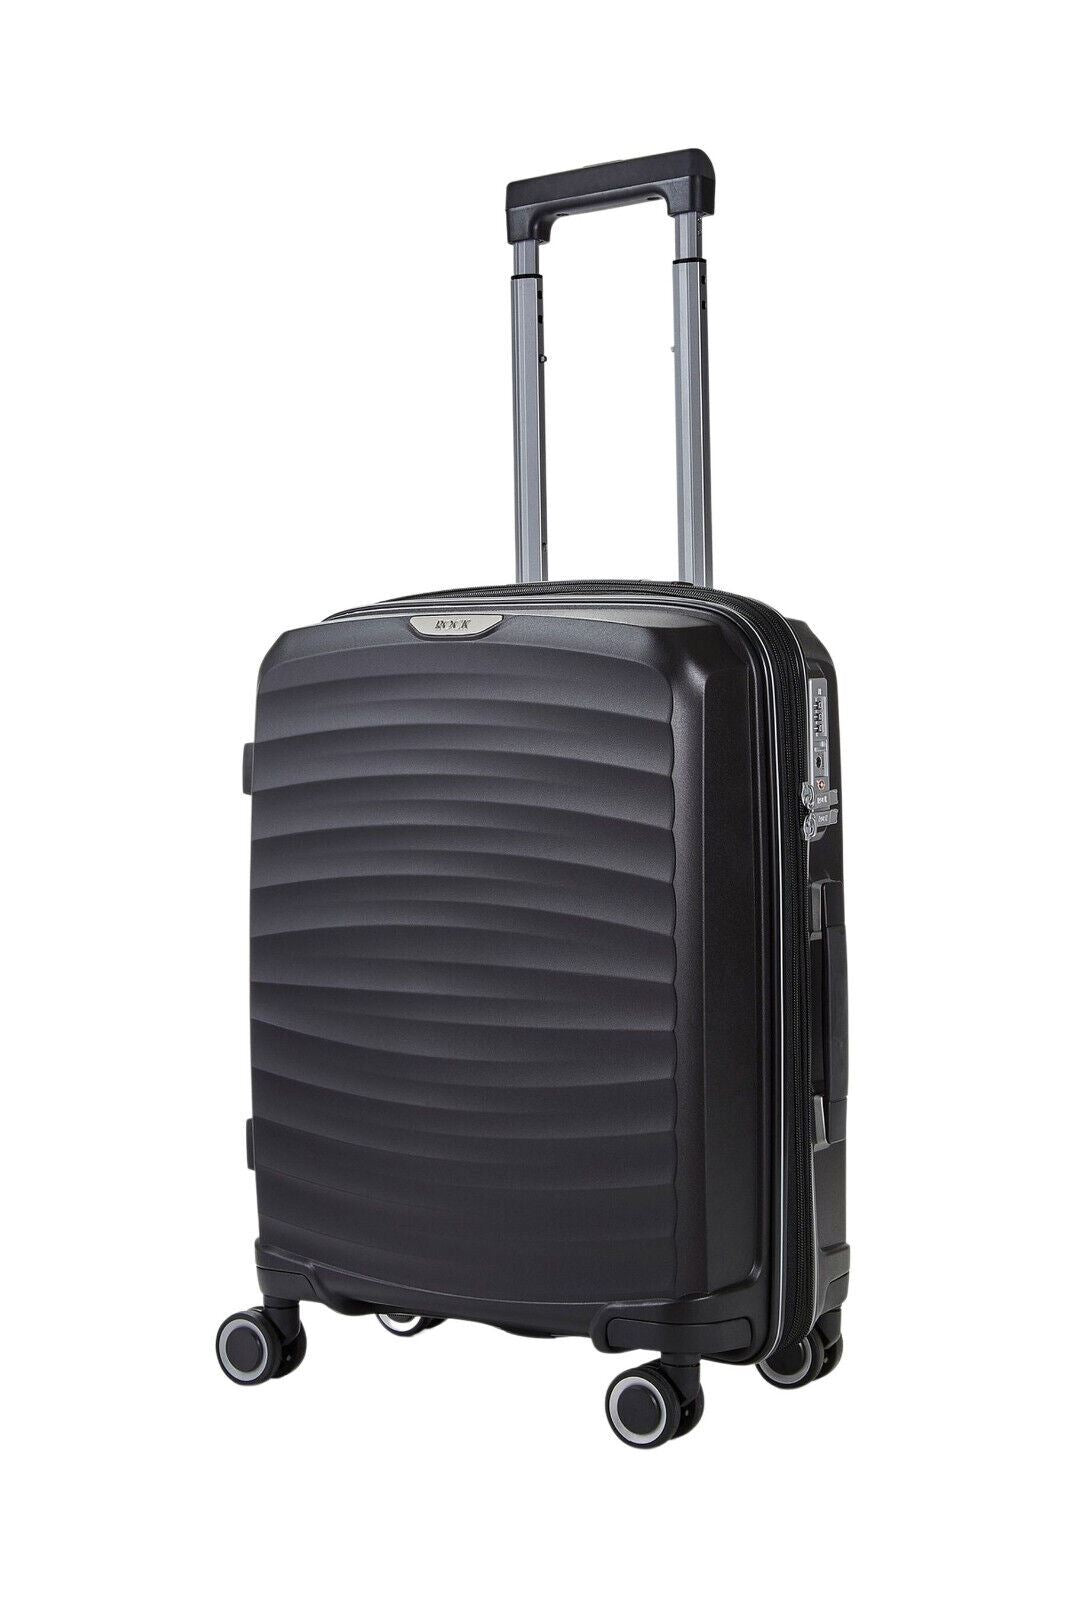 Altoona Cabin Hard Shell Suitcase in Black